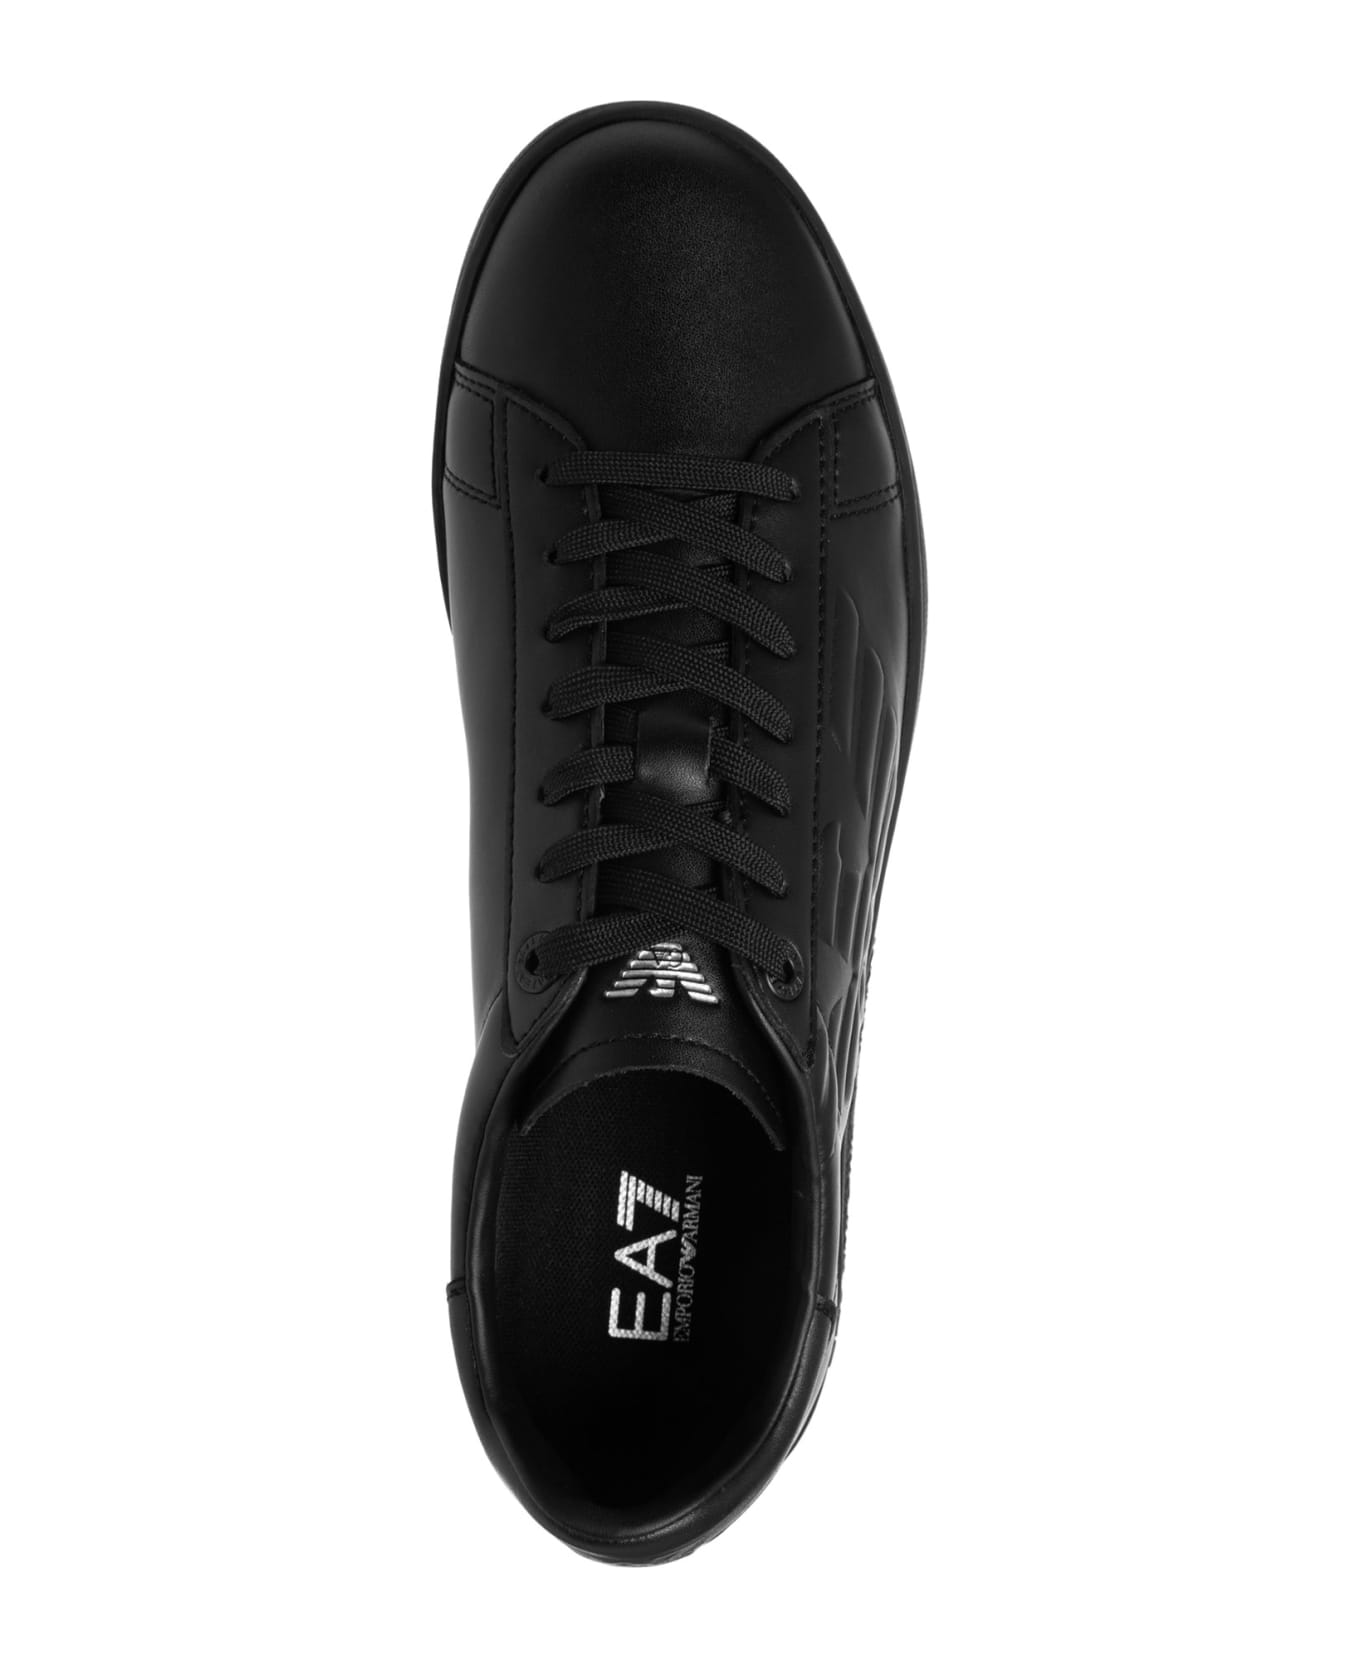 EA7 Classic New Cc Leather Sneakers - Black スニーカー